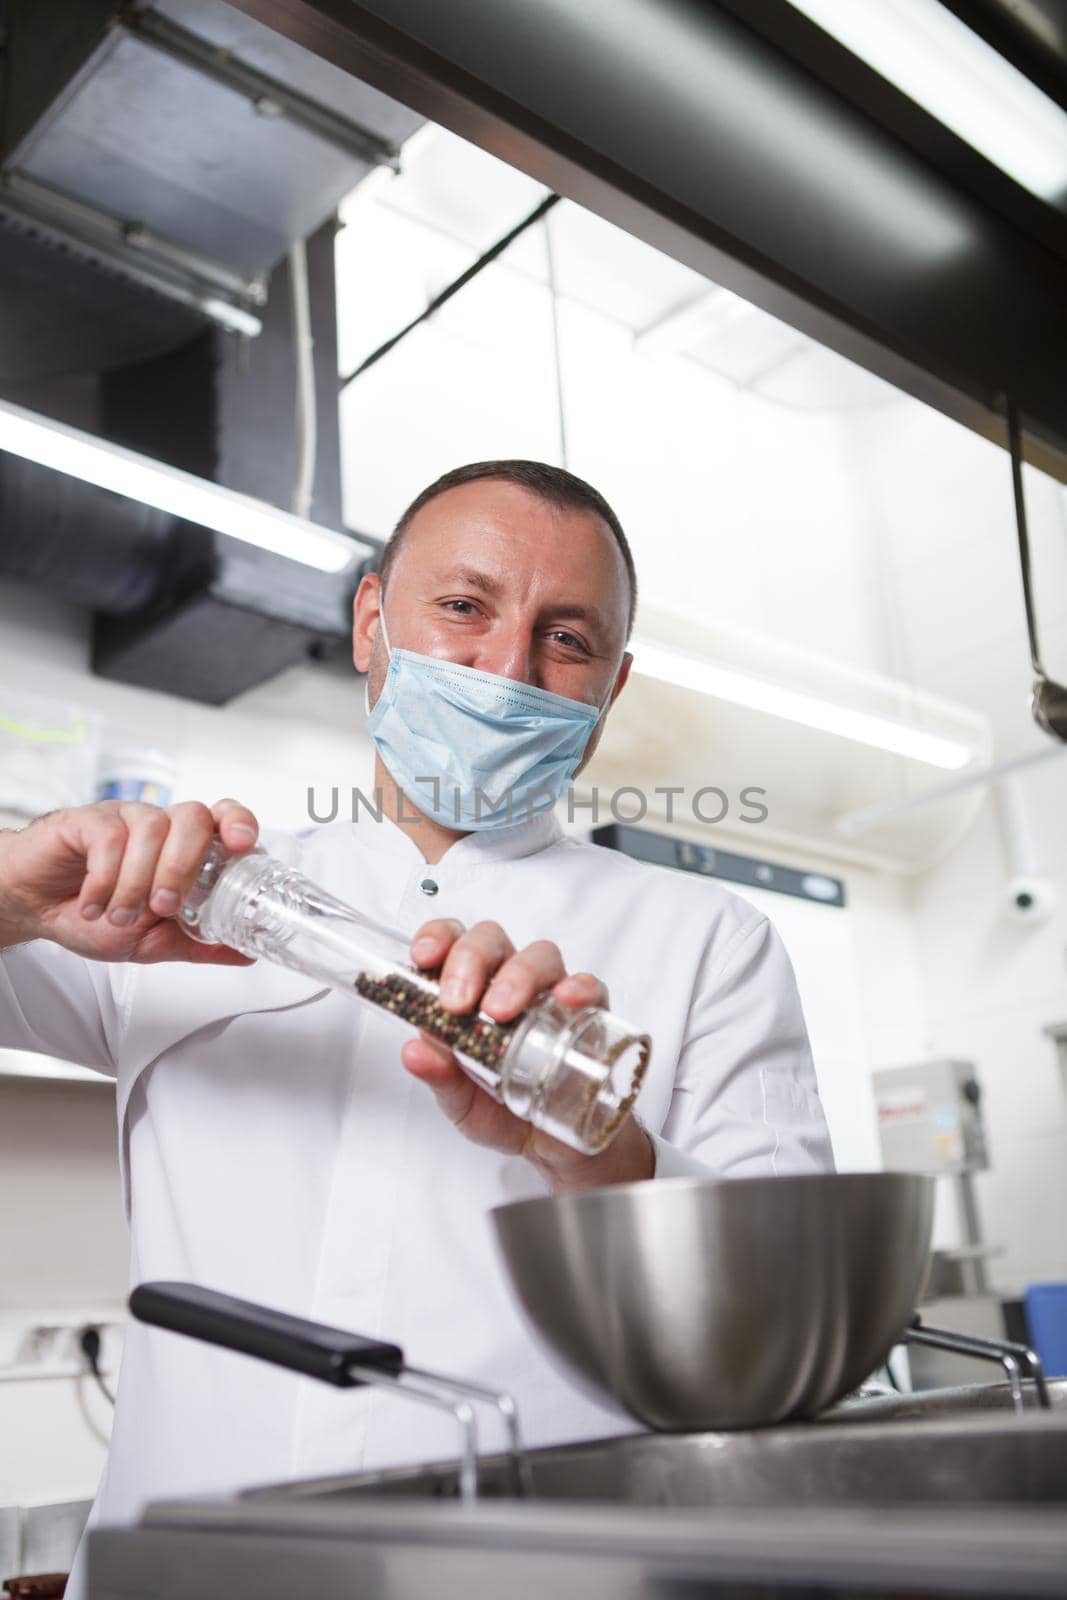 Vertical portrait of a chef in medical face mask salting prepared meal at restaurant kitchen